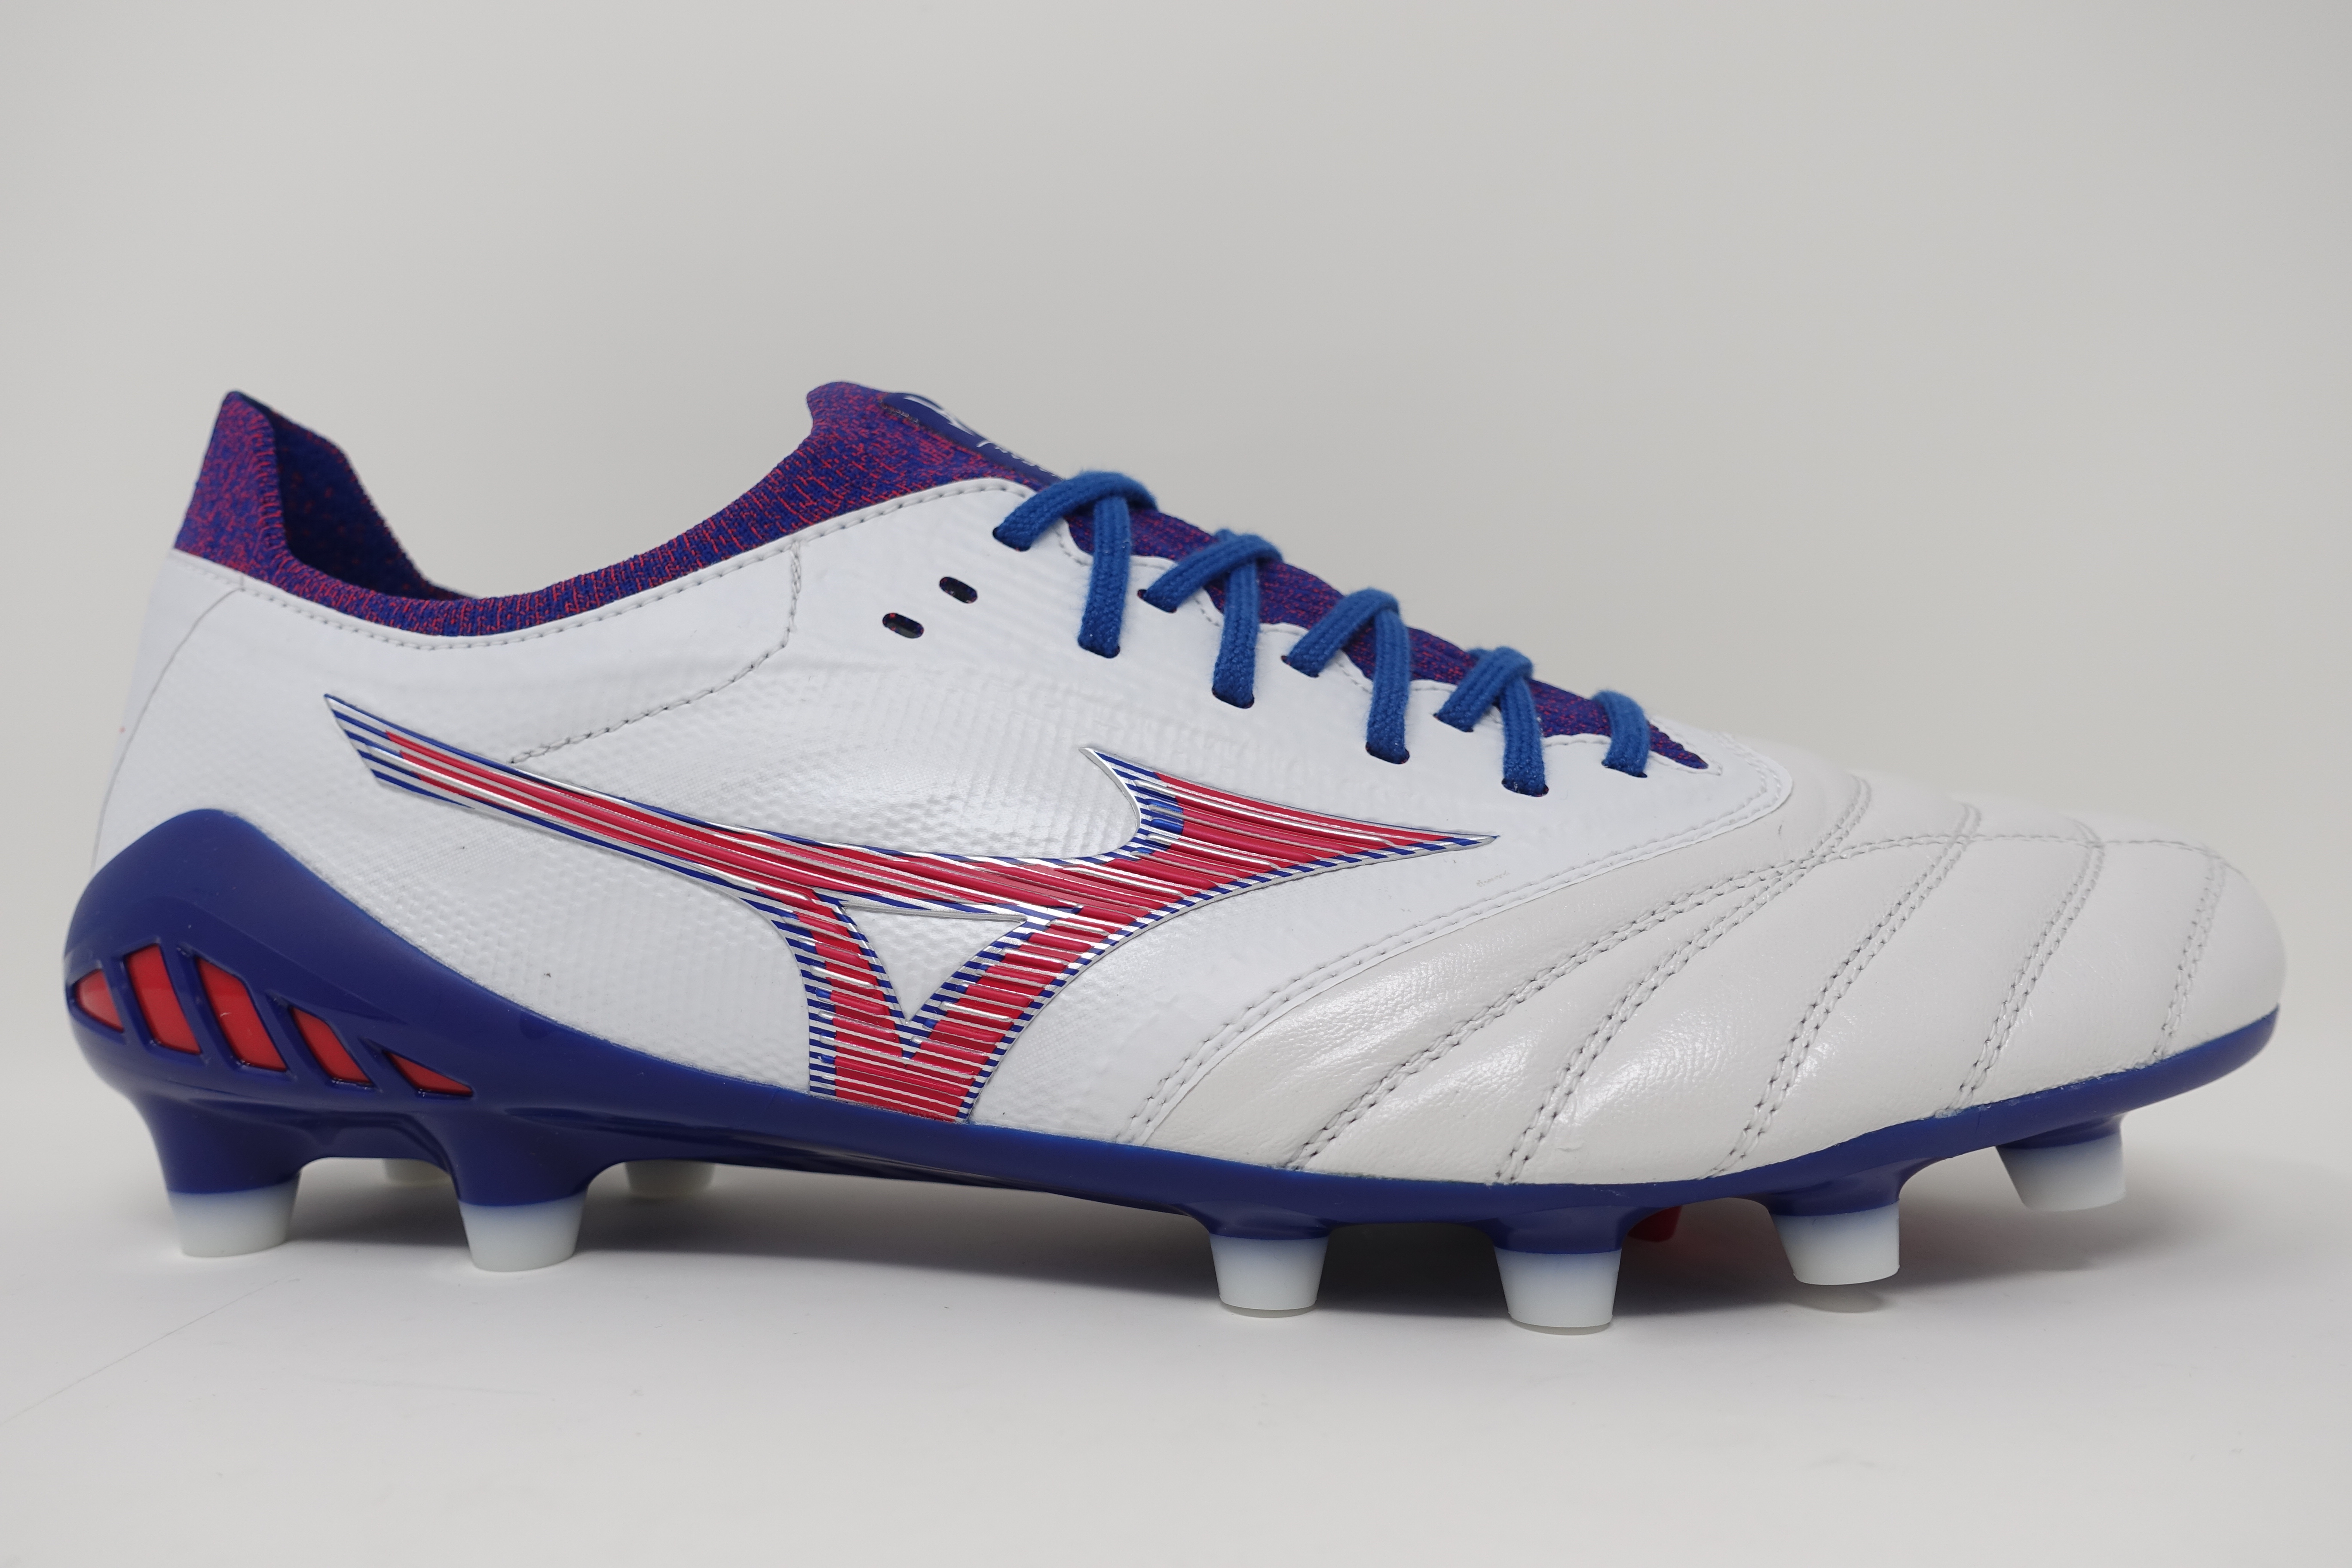 Mizuno-Morelia-Neo-3-Made-in-Japan-Next-Wave-Pack-Soccer-Football-Boots-3